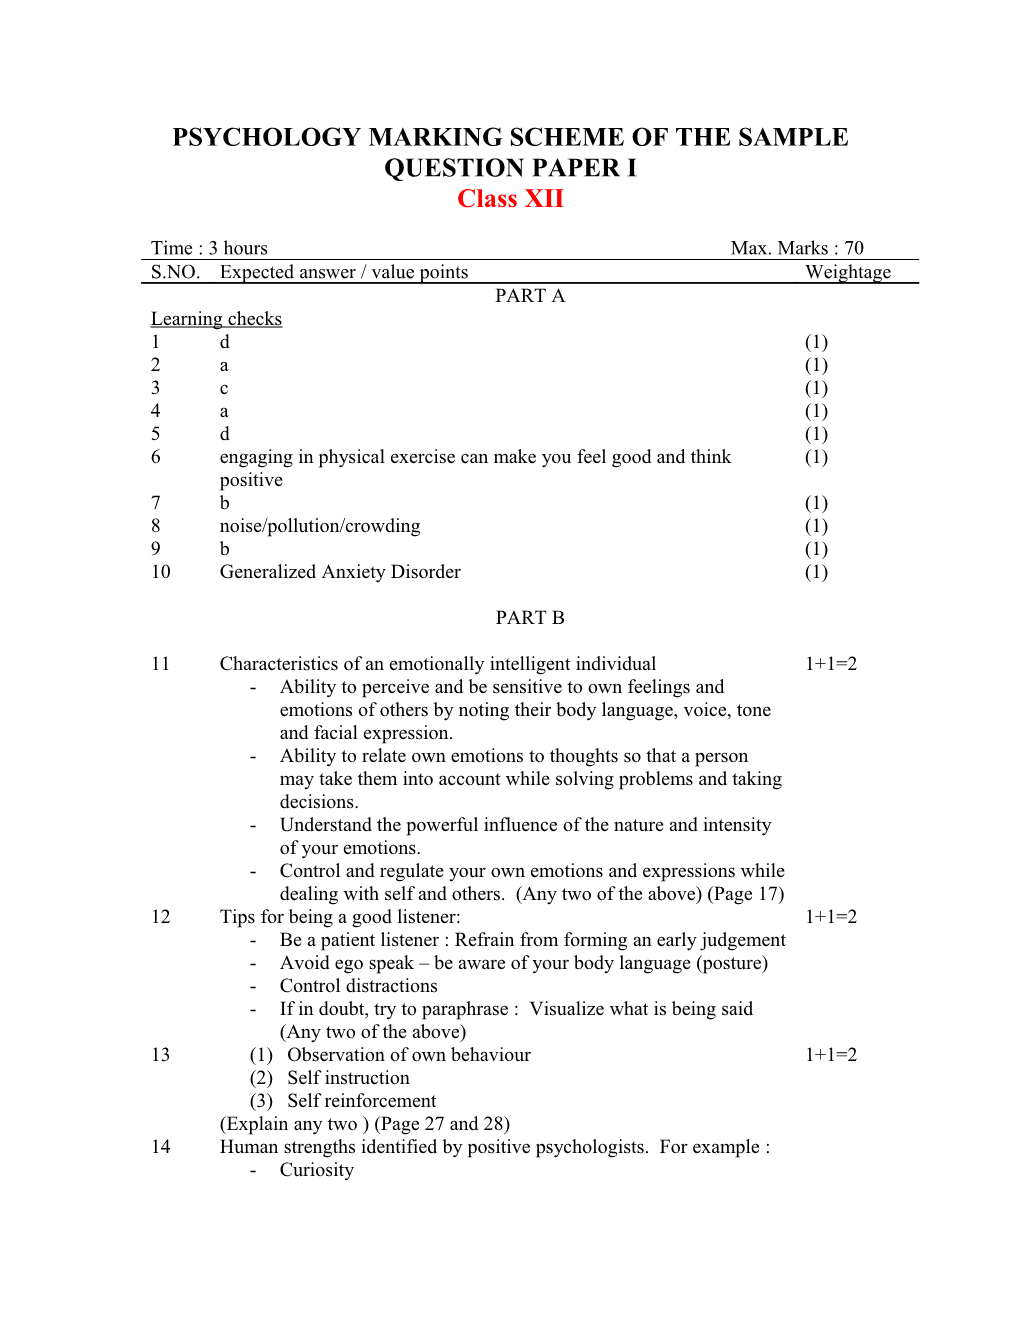 Psychology Marking Scheme of the Sample Question Paper I